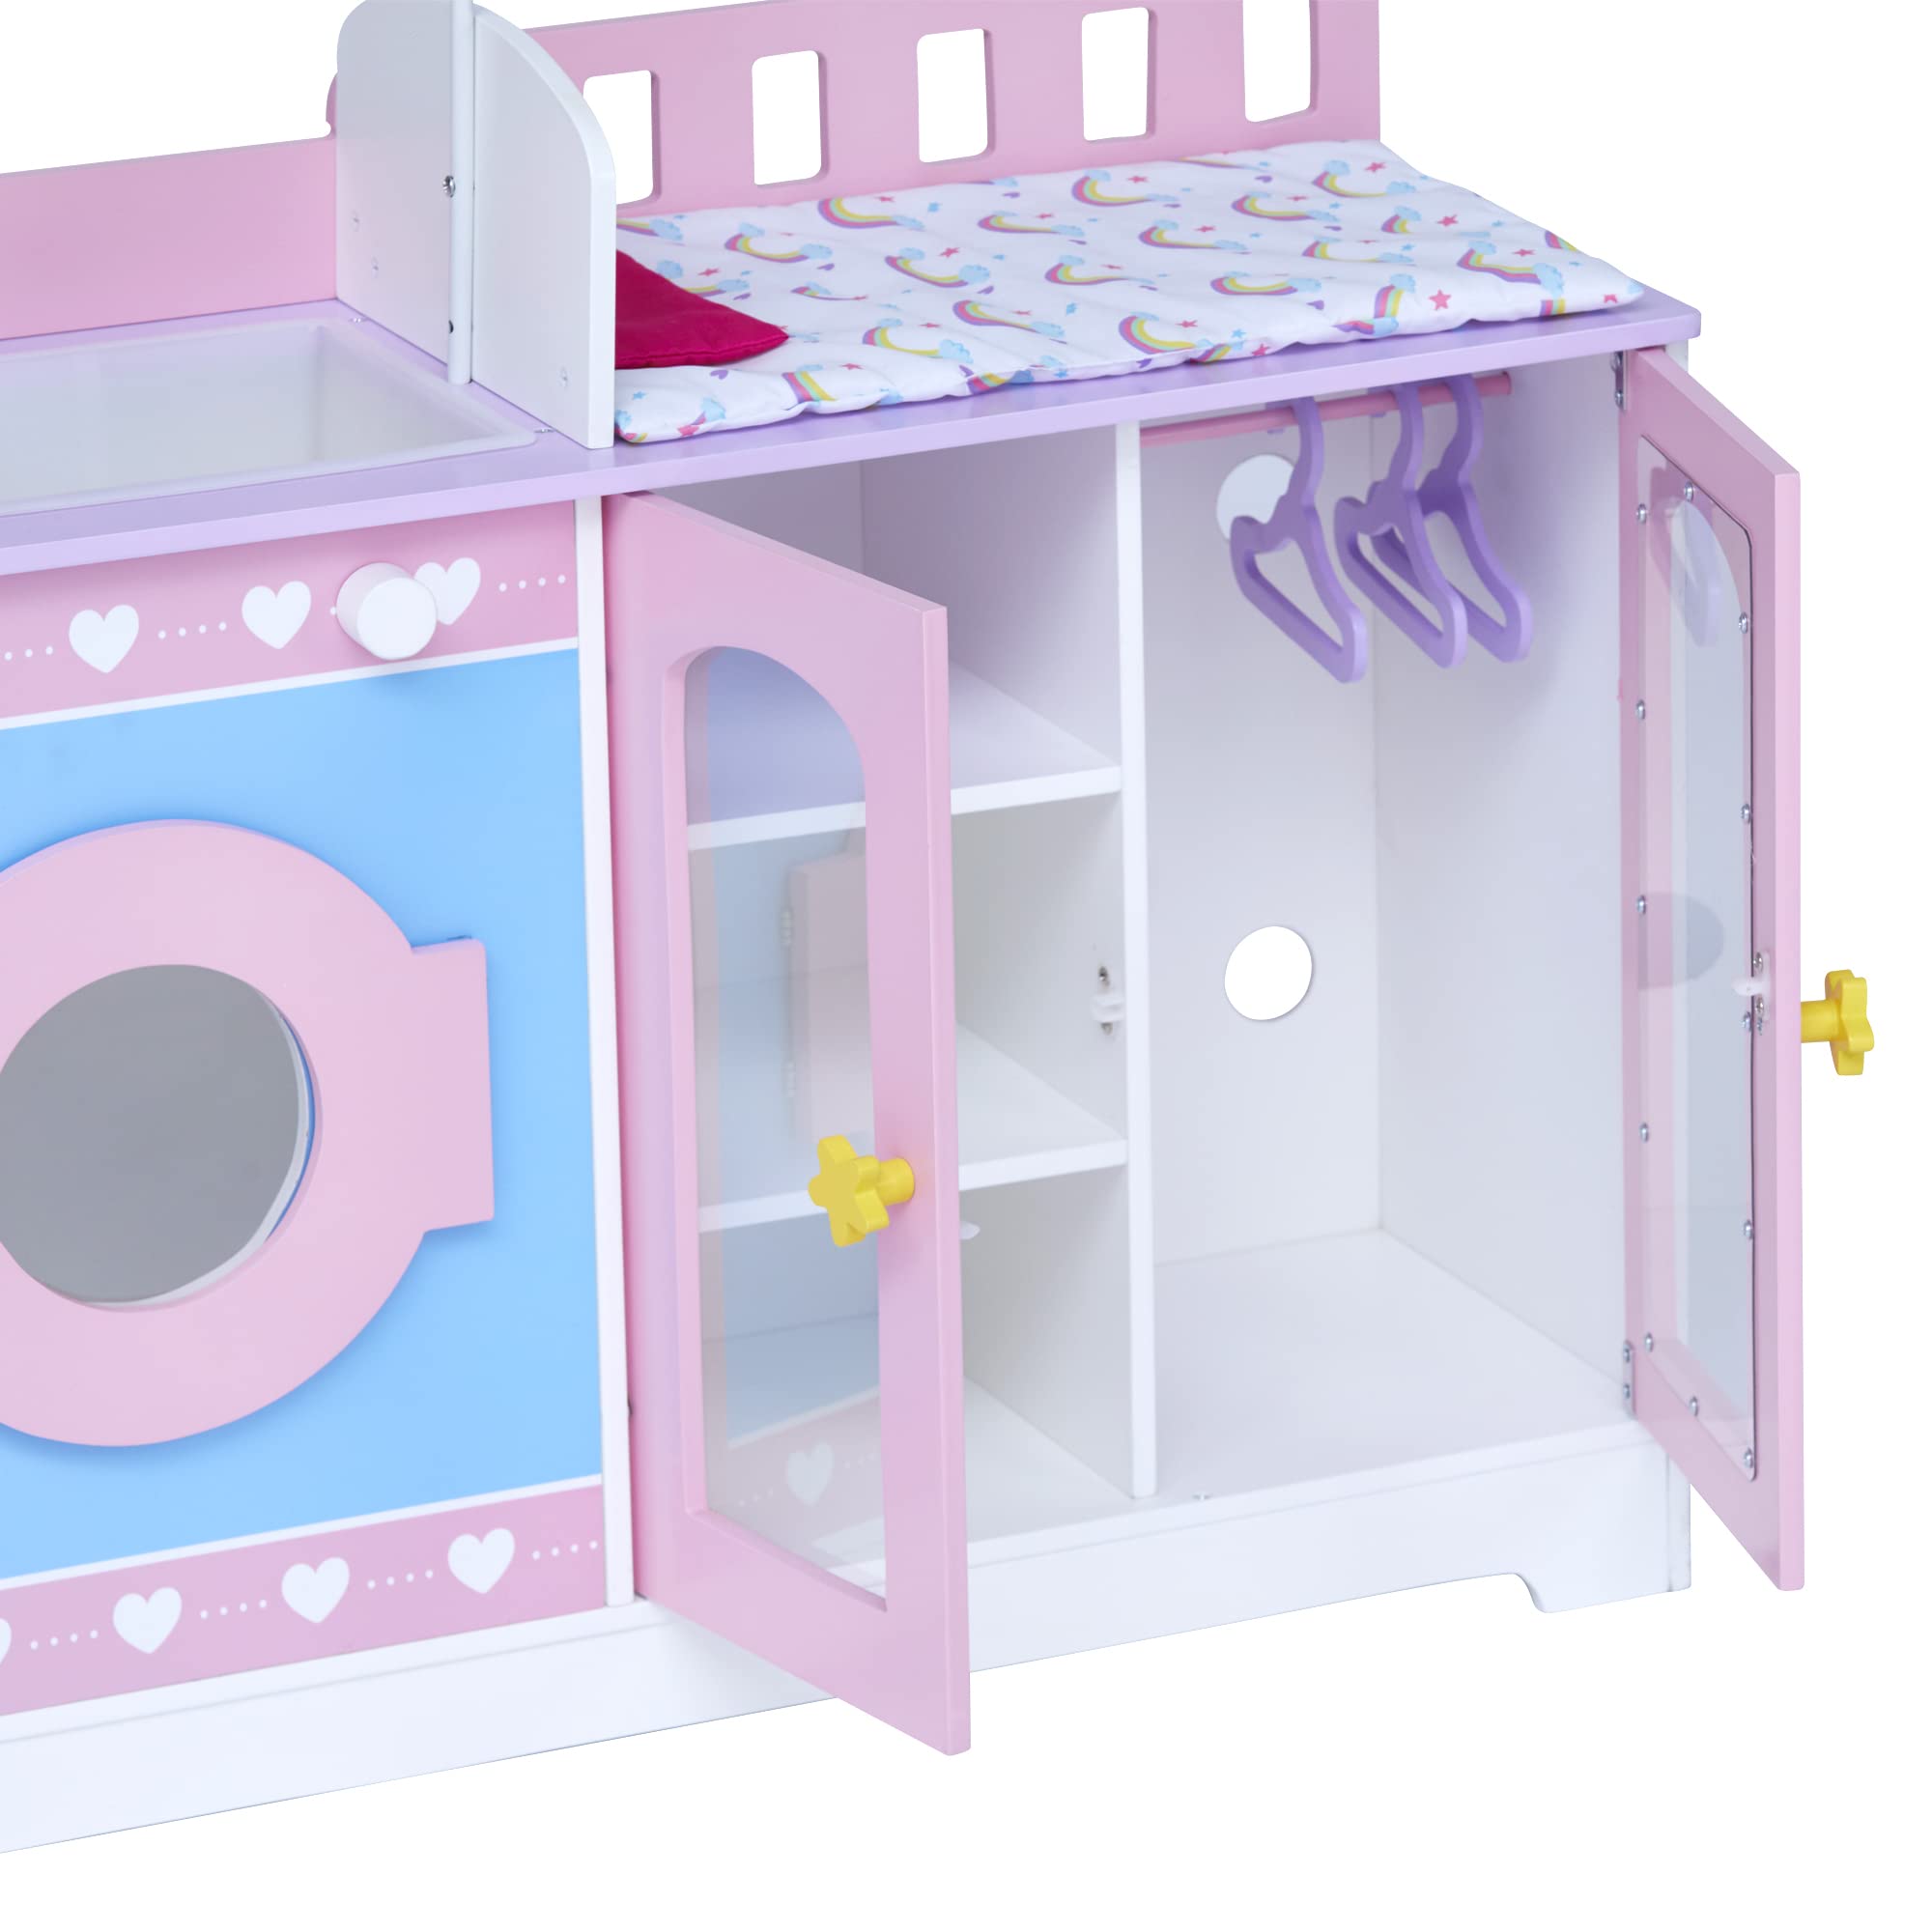 Olivia's Little World - Baby Doll Changing Table, Crib Furniture, Nursey Playset, Baby Care Activity Center with Storage for Dolls Accessories - Pink/Purple